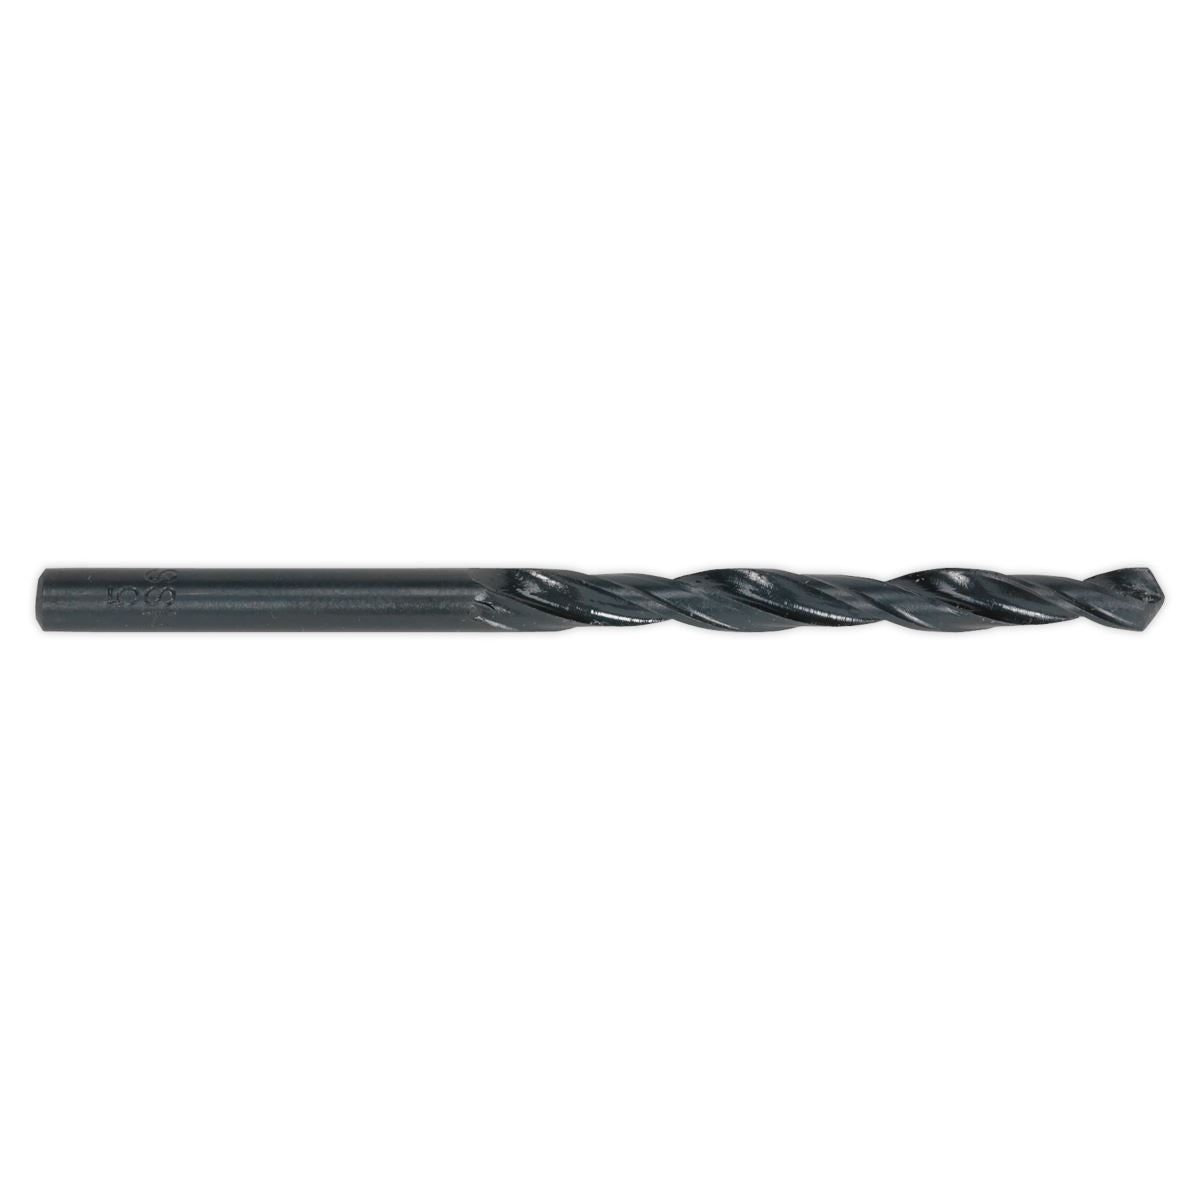 Sealey HSS Roll Forged Drill Bit Ø8.5mm Pack of 10